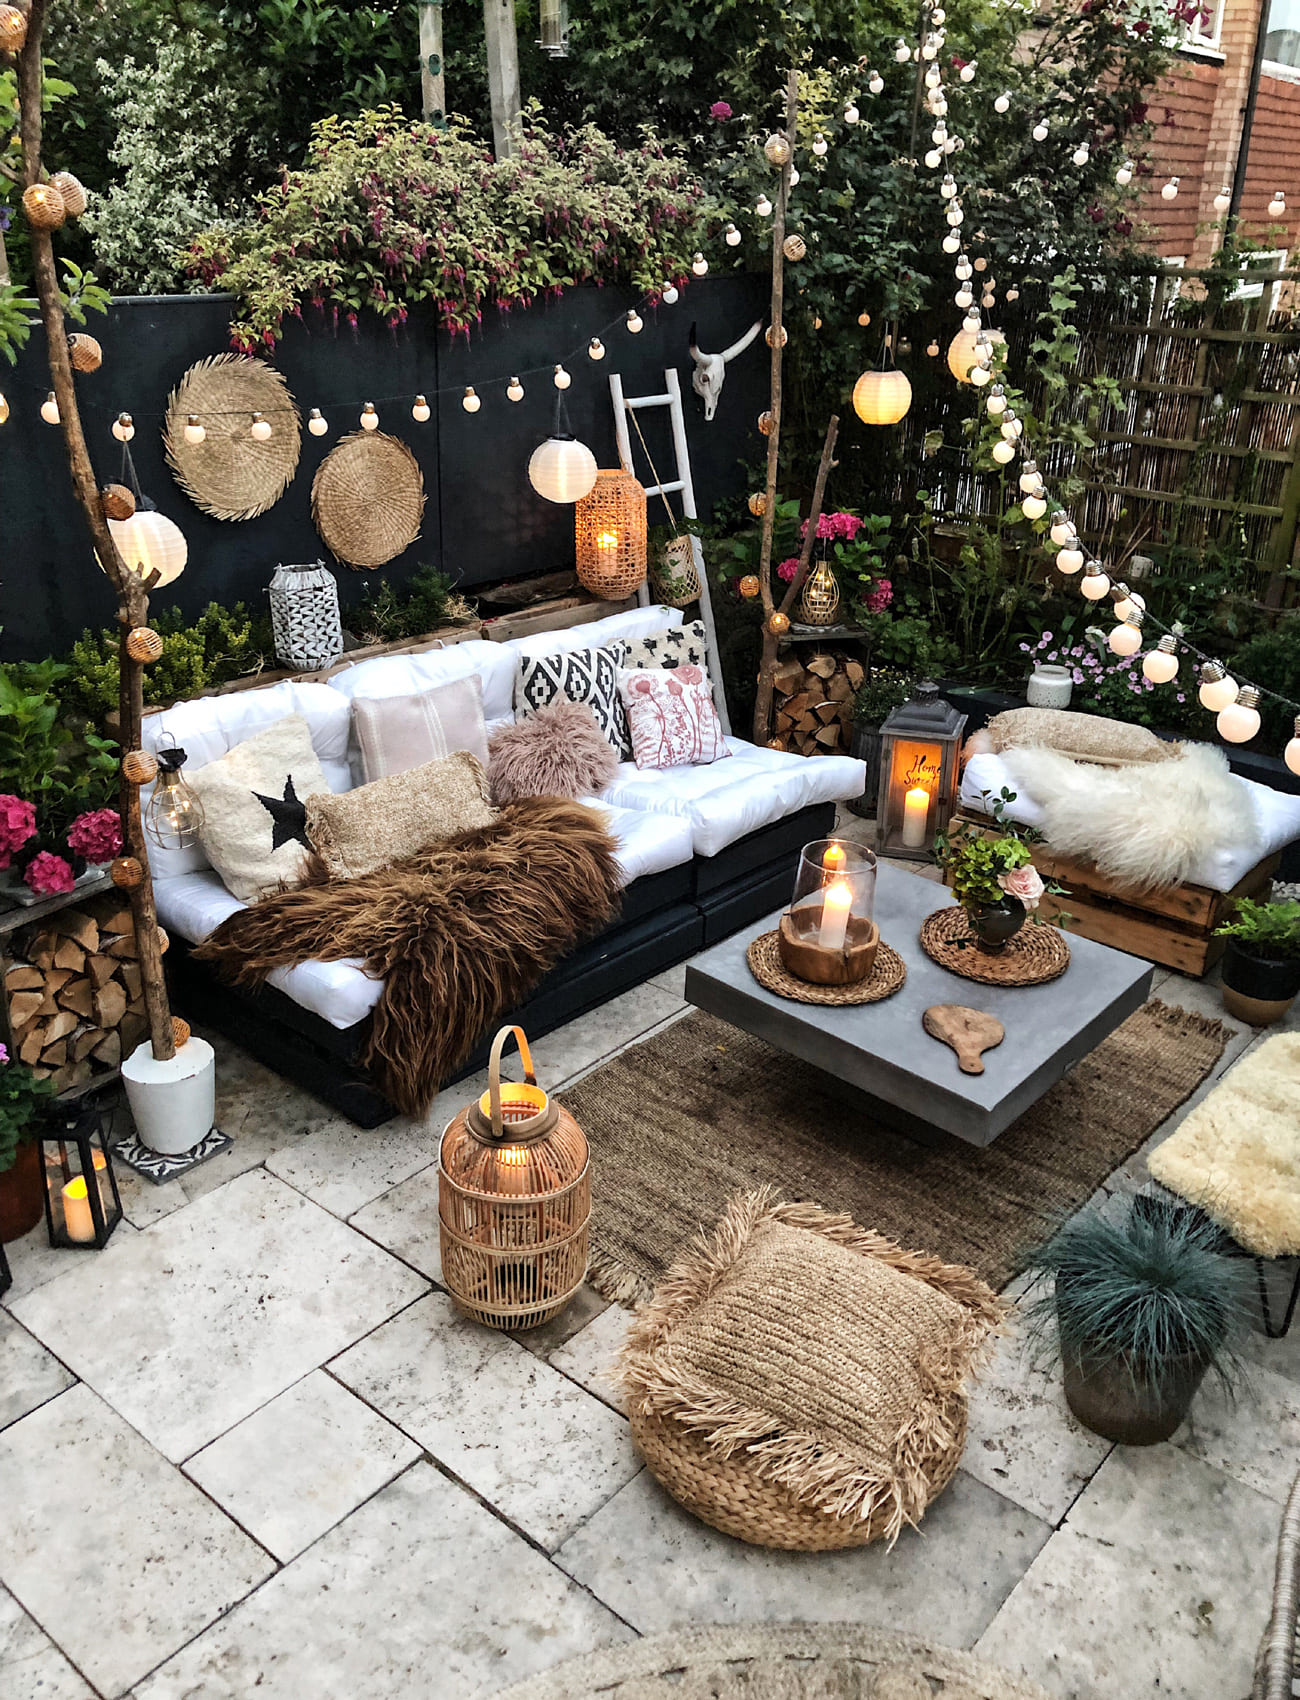 25 fabulous ideas to turn patios into inviting outdoor spaces - 85